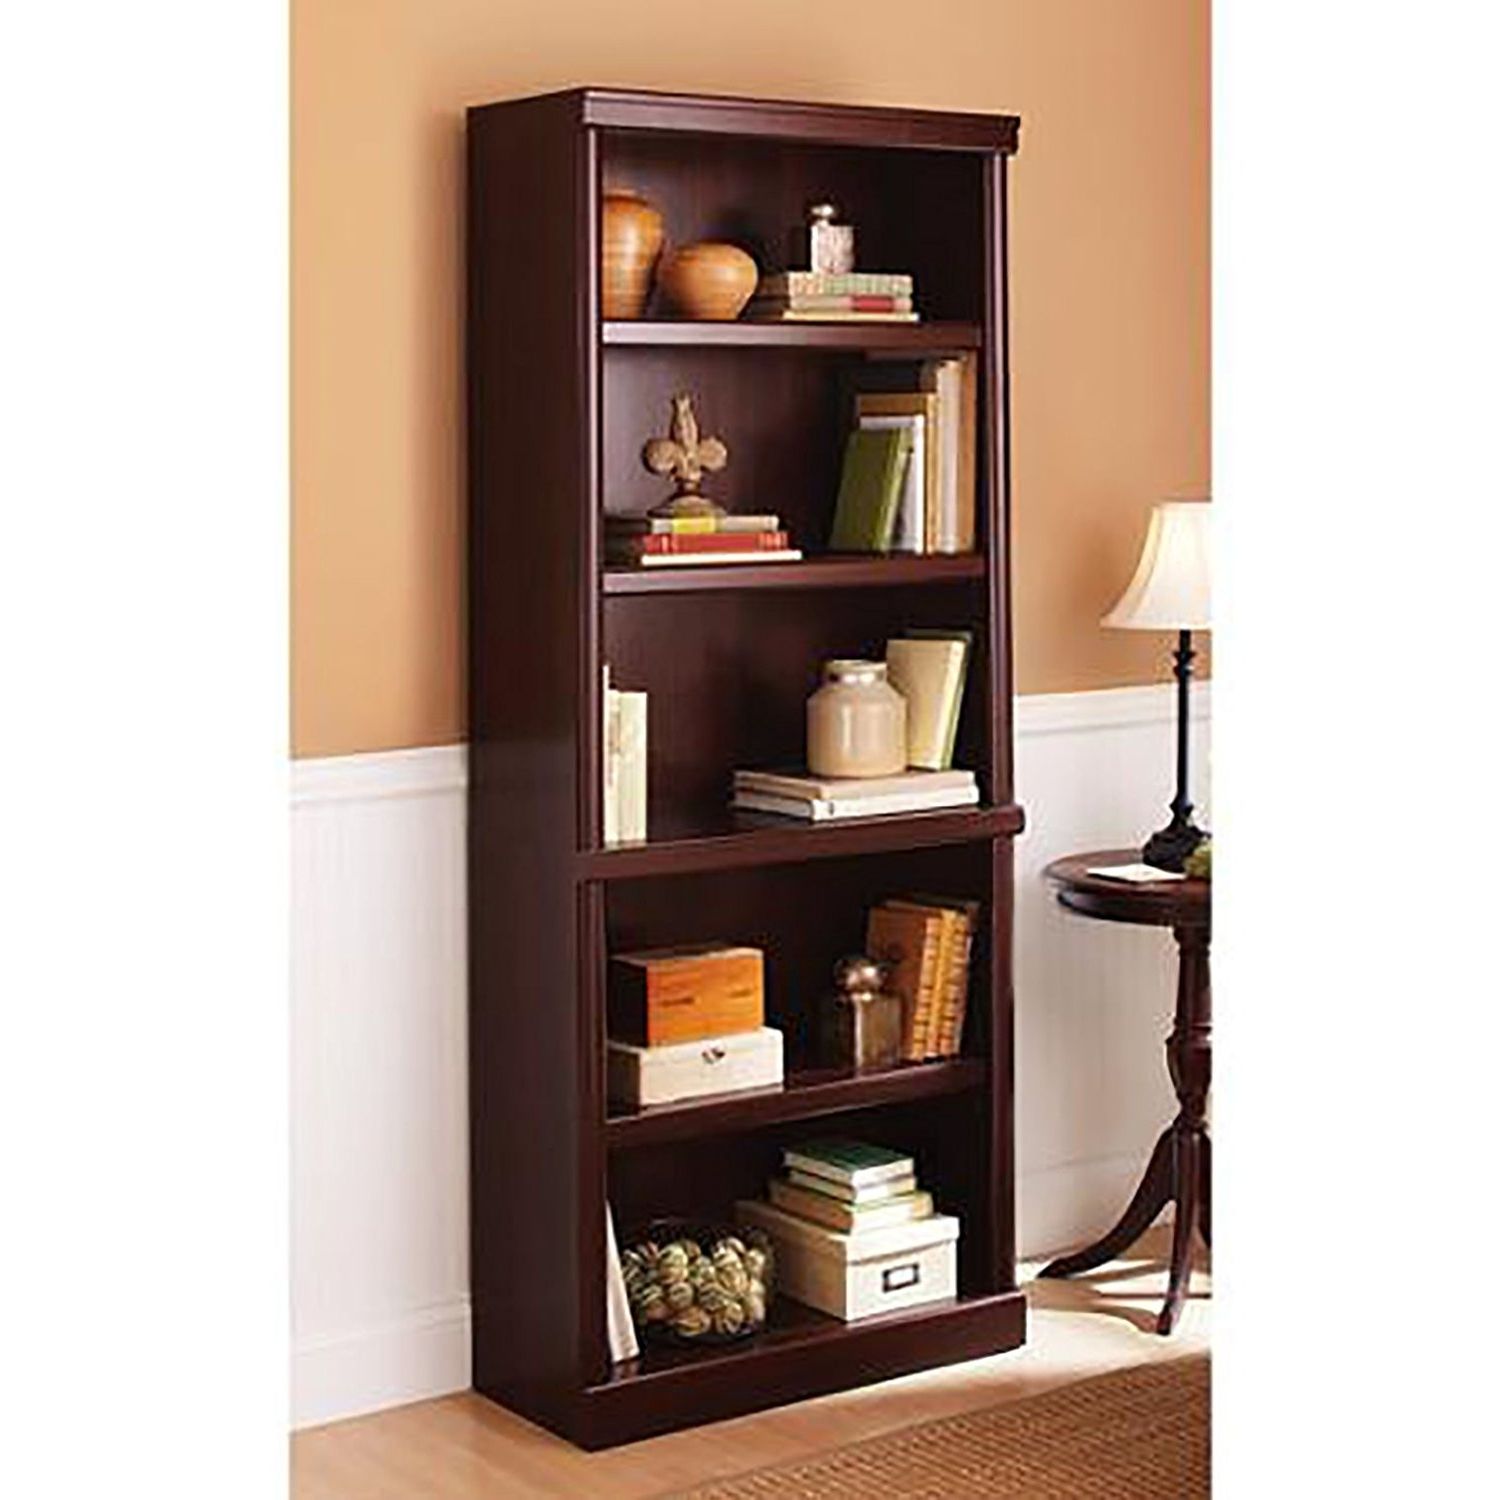 Most Popular High Quality Bookshelves With Amazon: 5 Shelf Cherry Bookcase Wooden Book Case Storage (View 4 of 15)